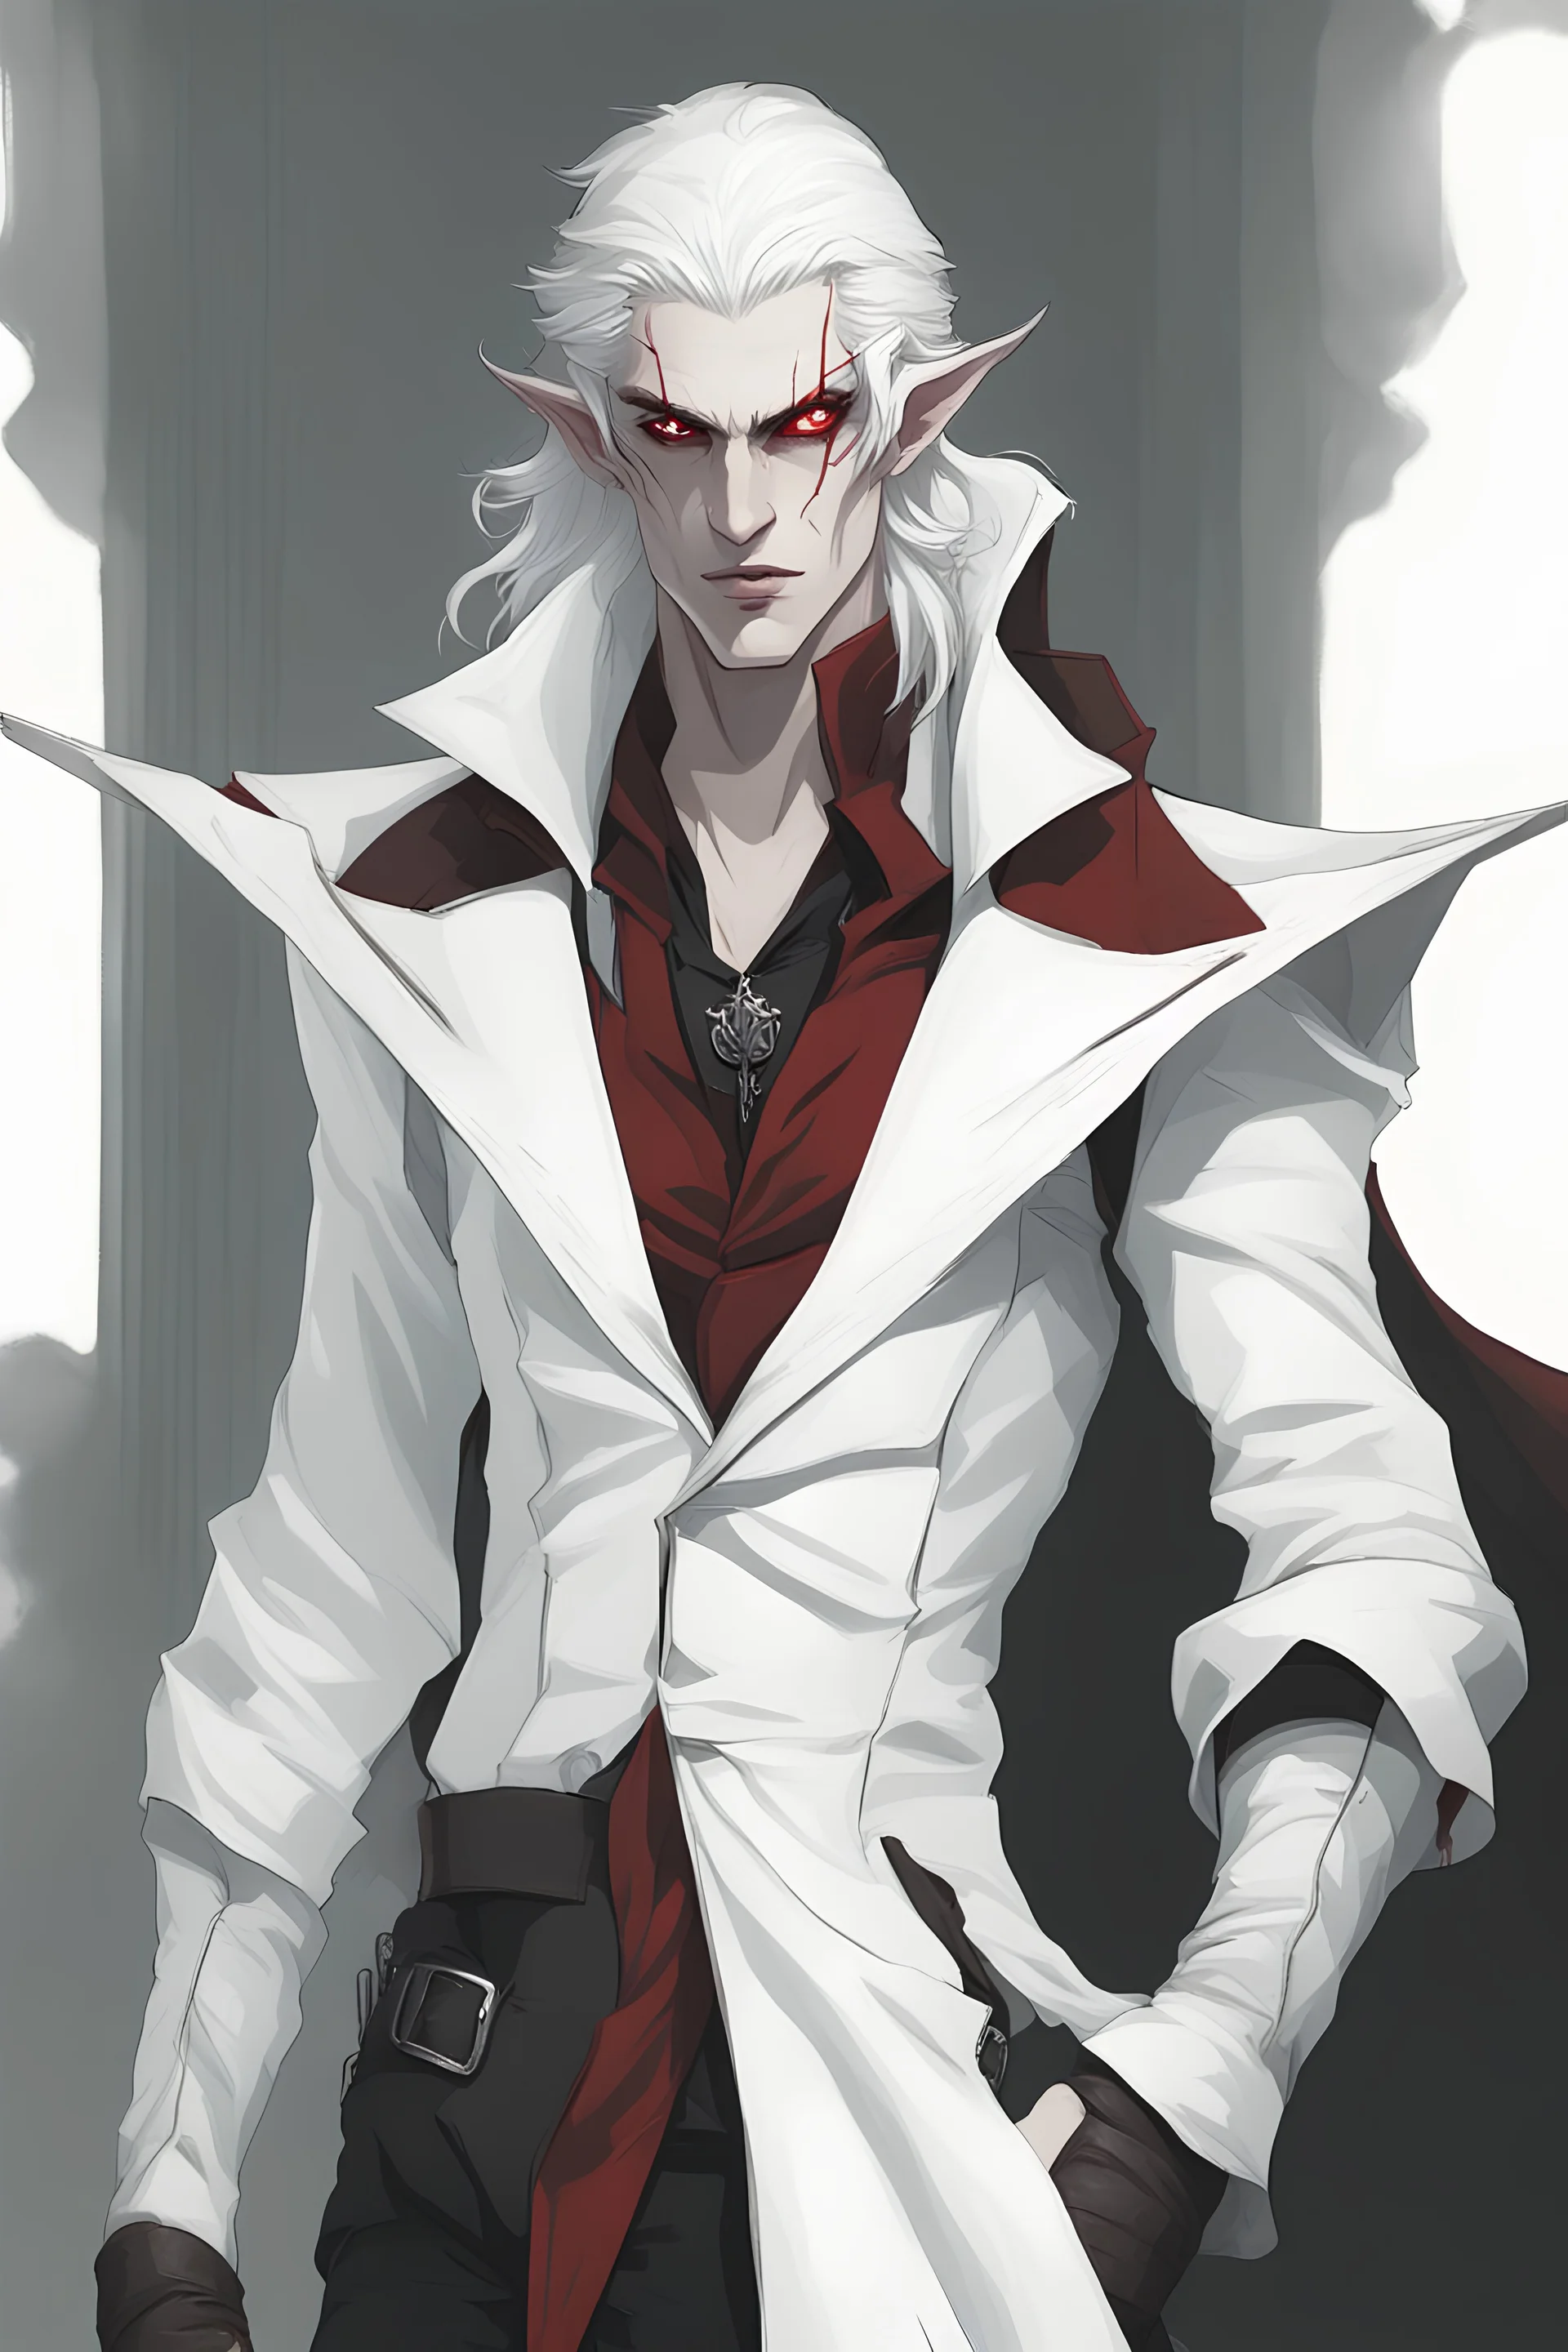 Tall white half elf vampire, with red eyes and dark leather clothes, looks like a good person